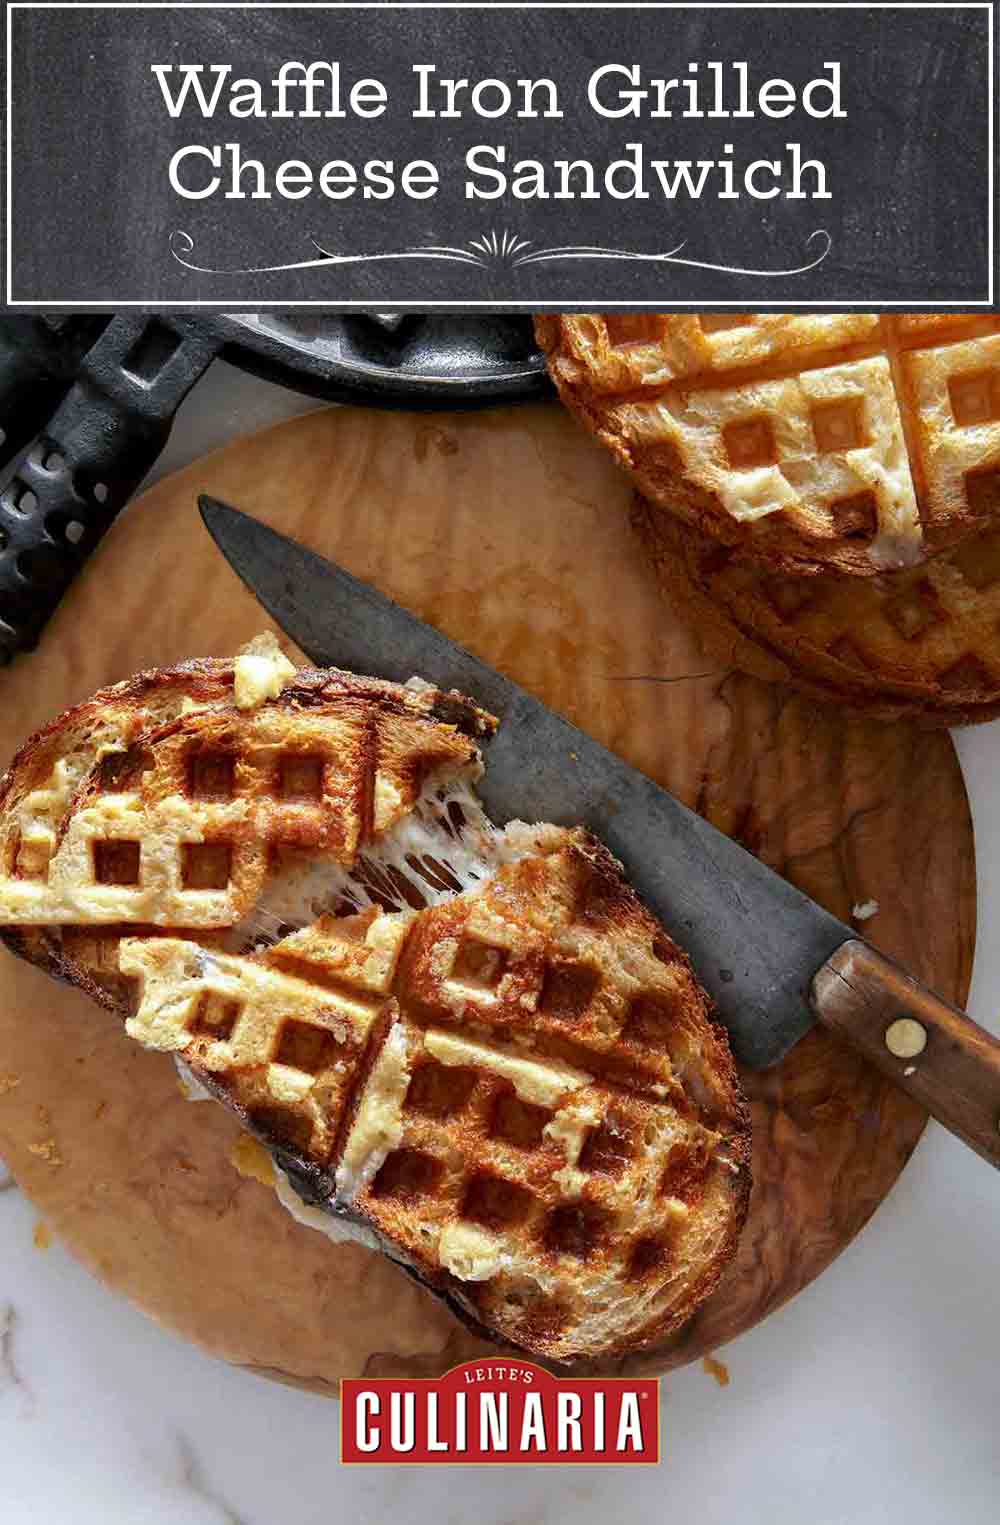 Two grilled cheese sandwiches, made in a waffle iron, on a cutting blade with a knife and waffle iron